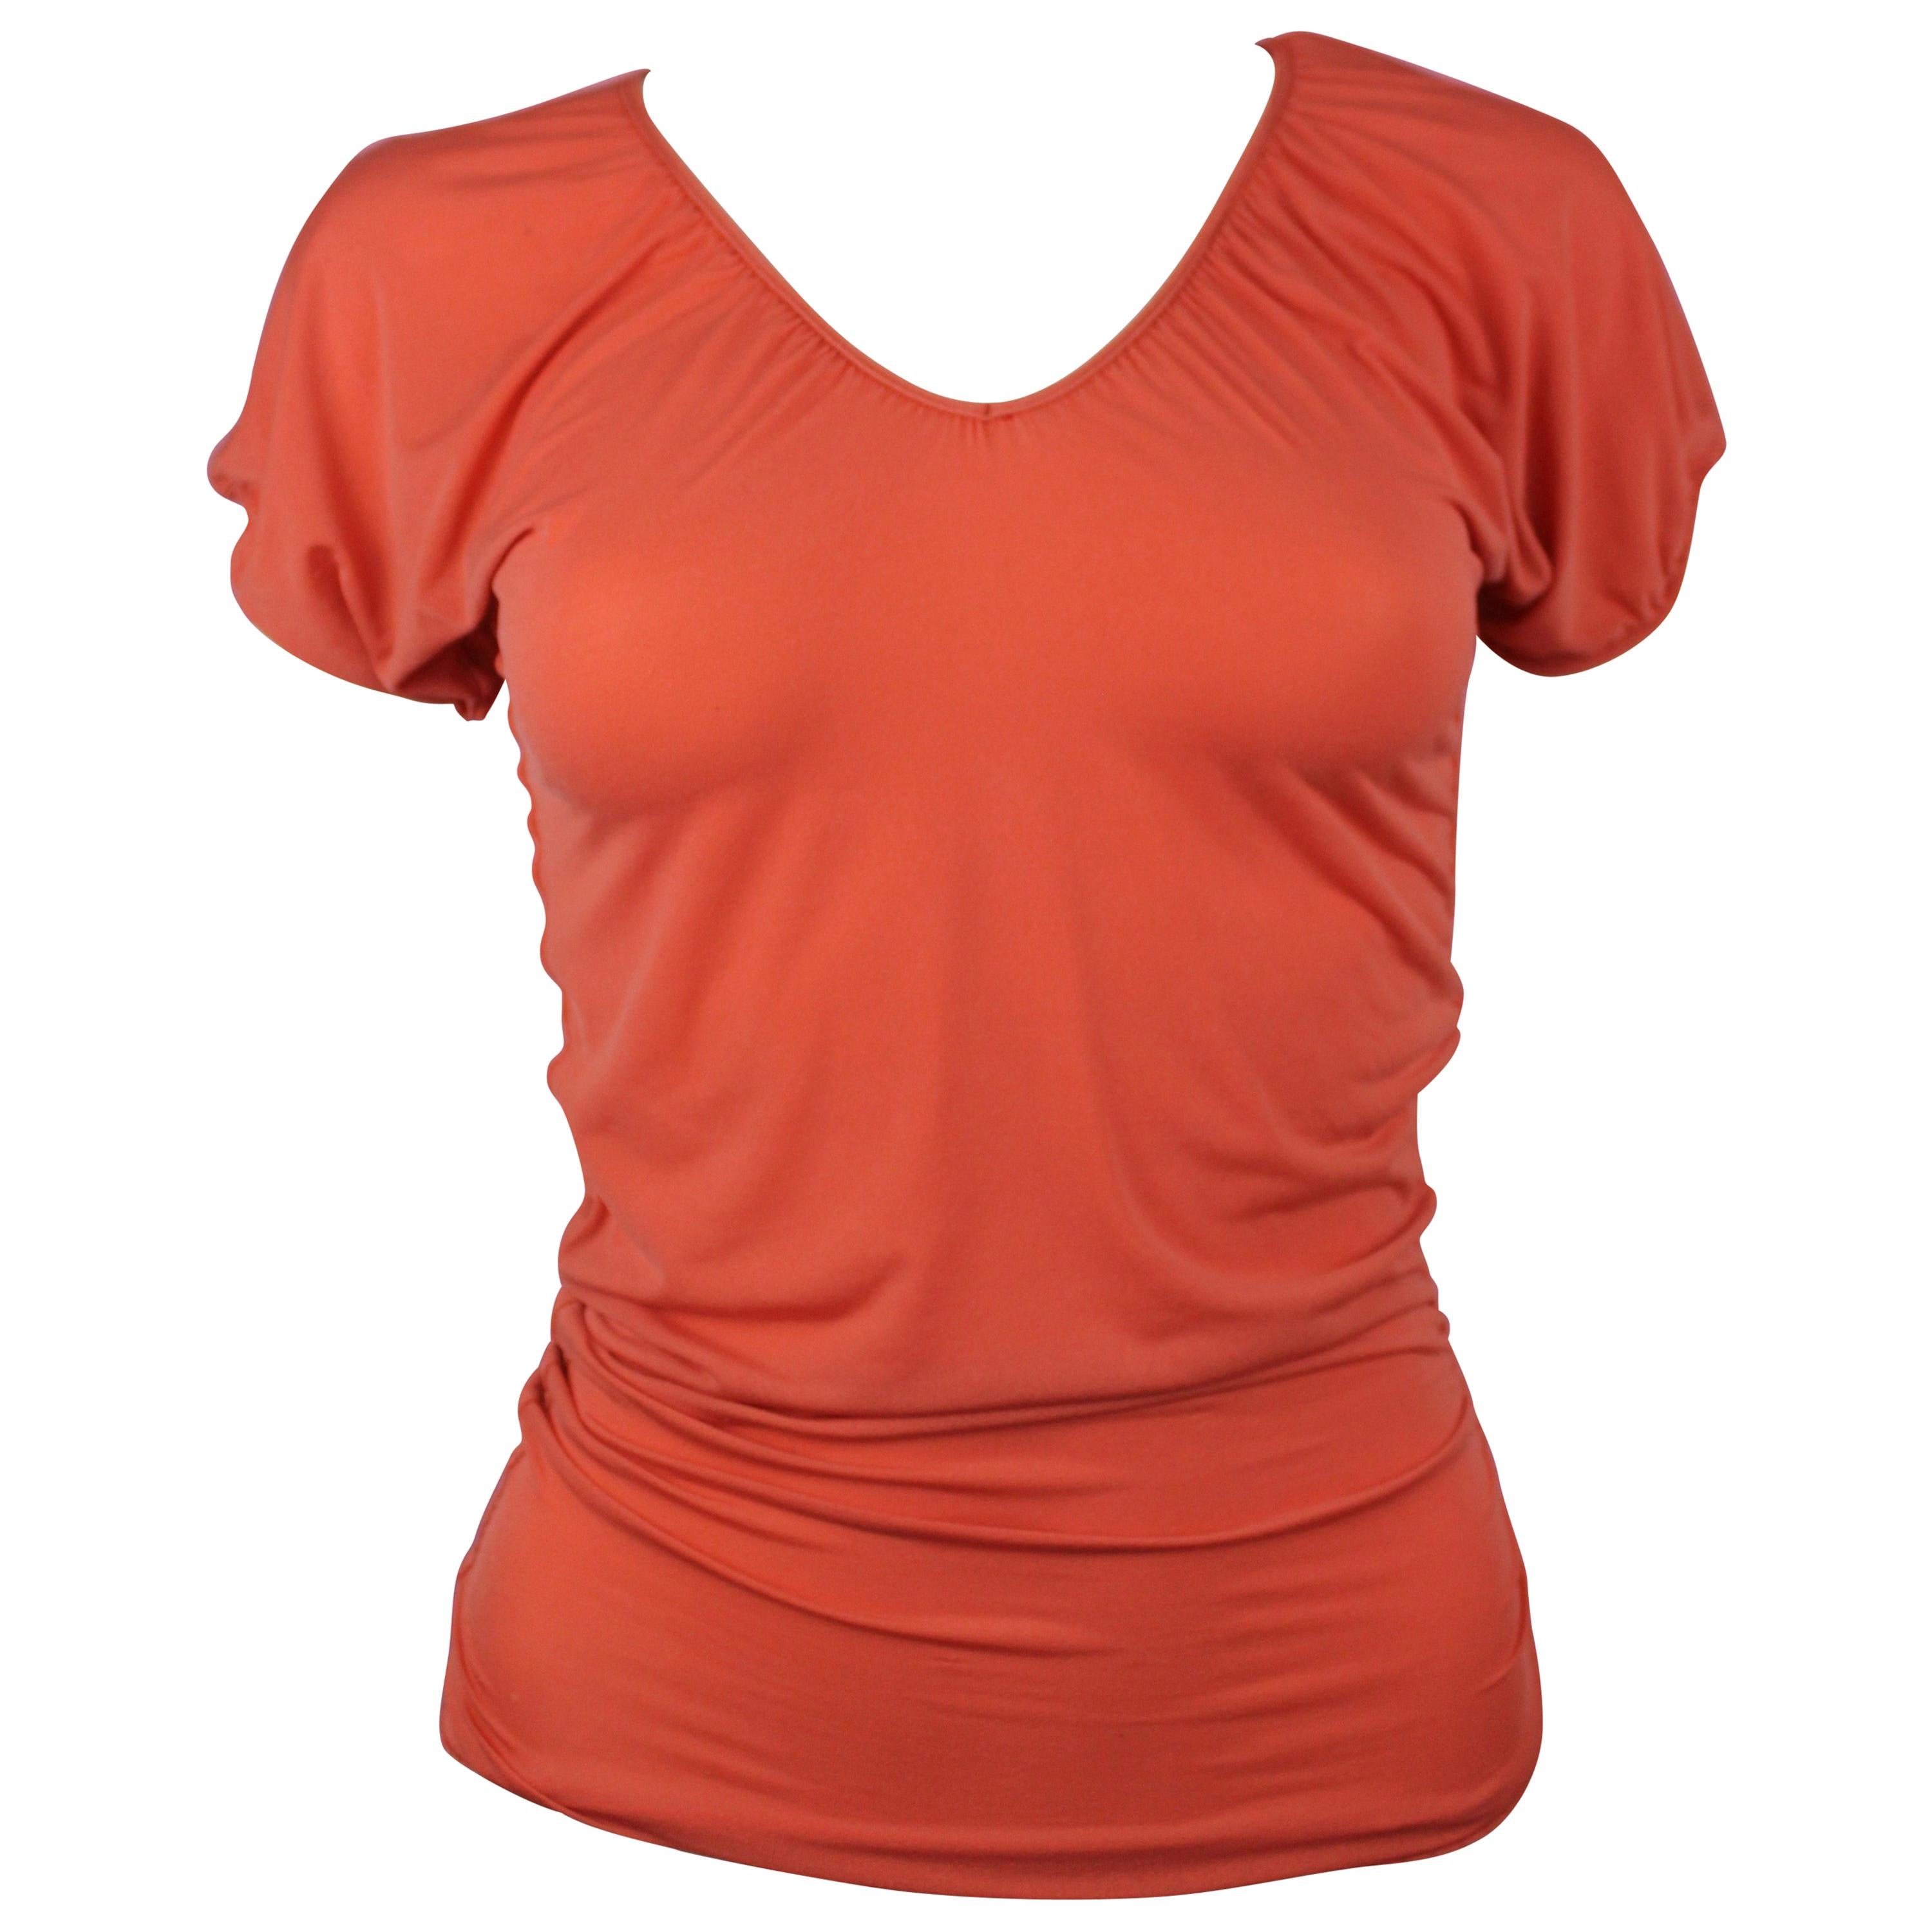 Jean Paul Gaultier Femme Ruched Sleeve Orange Top, Size 4 For Sale